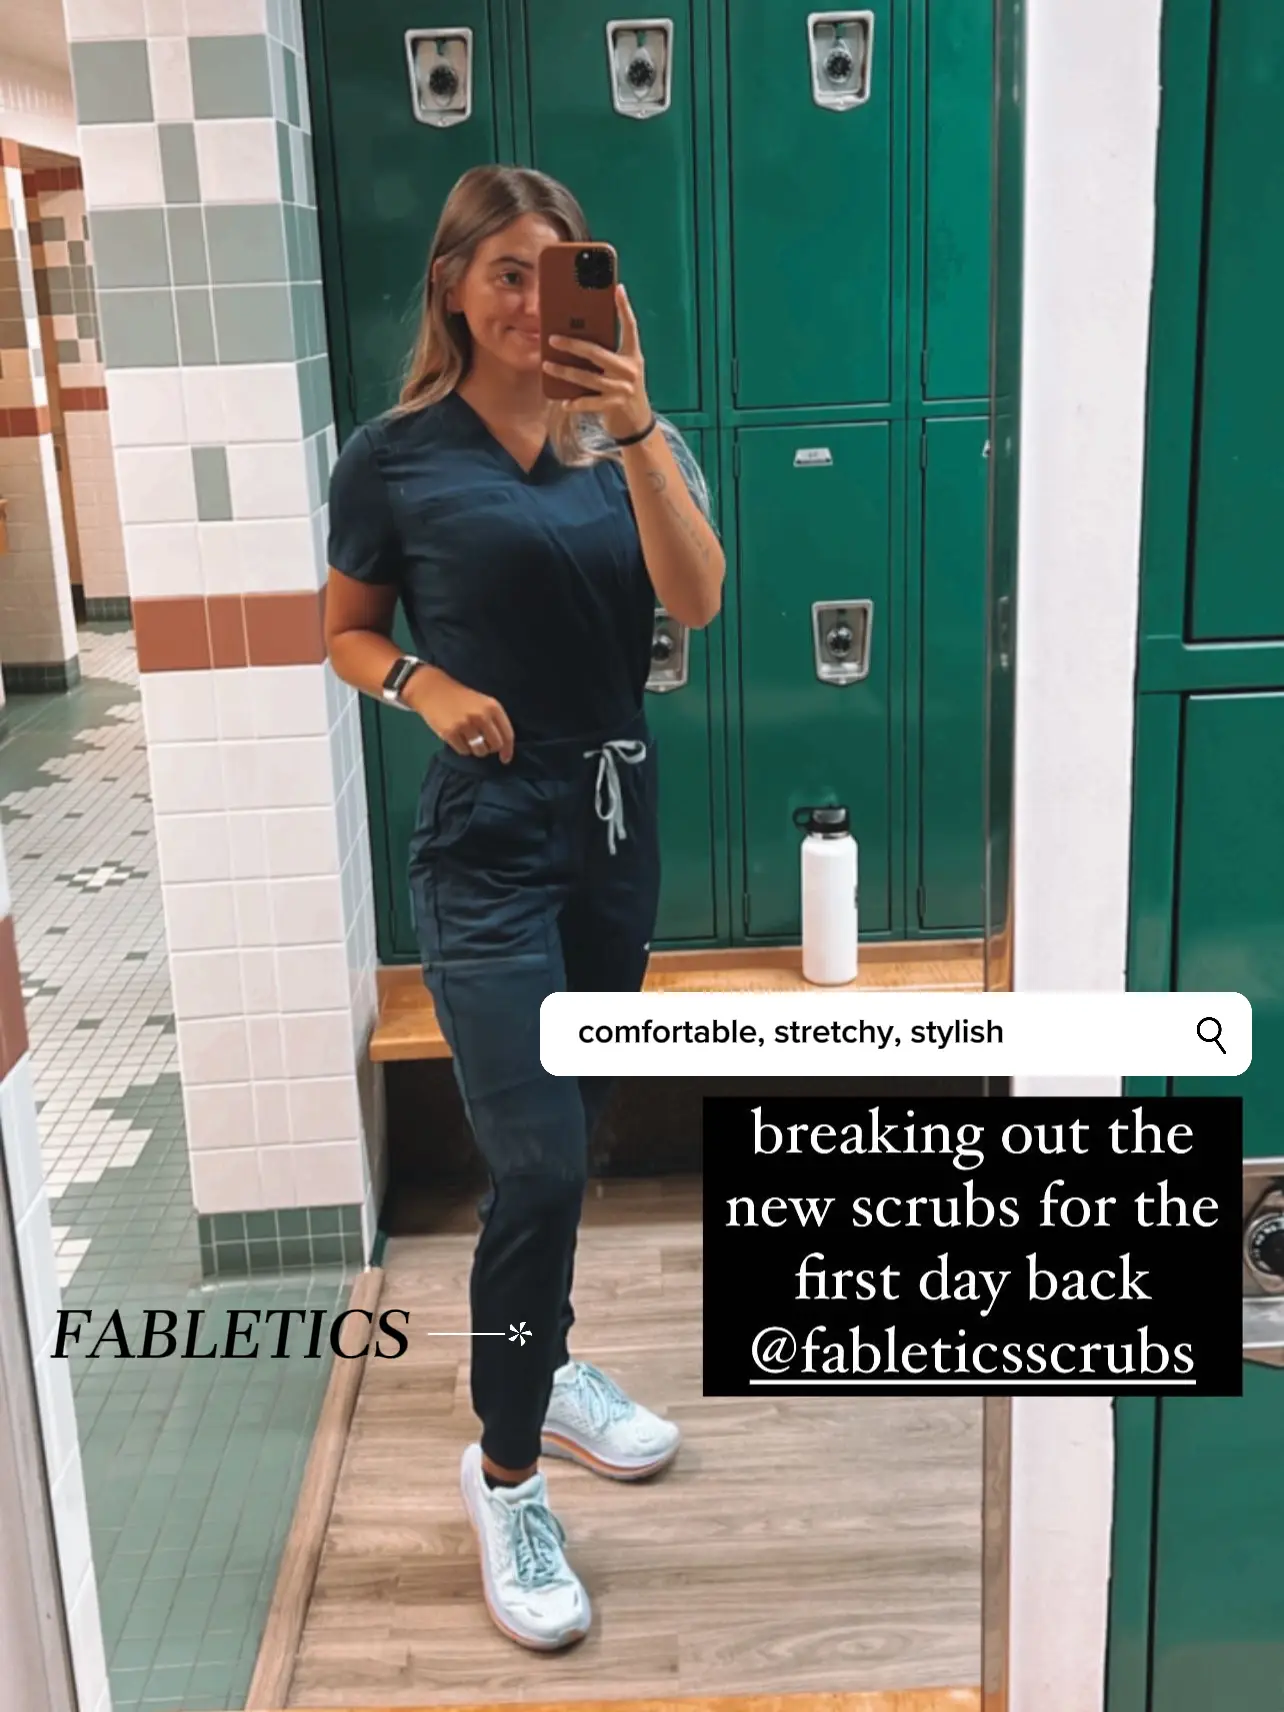 I had to post my new scrubs #fabletics #fableticsscrubs